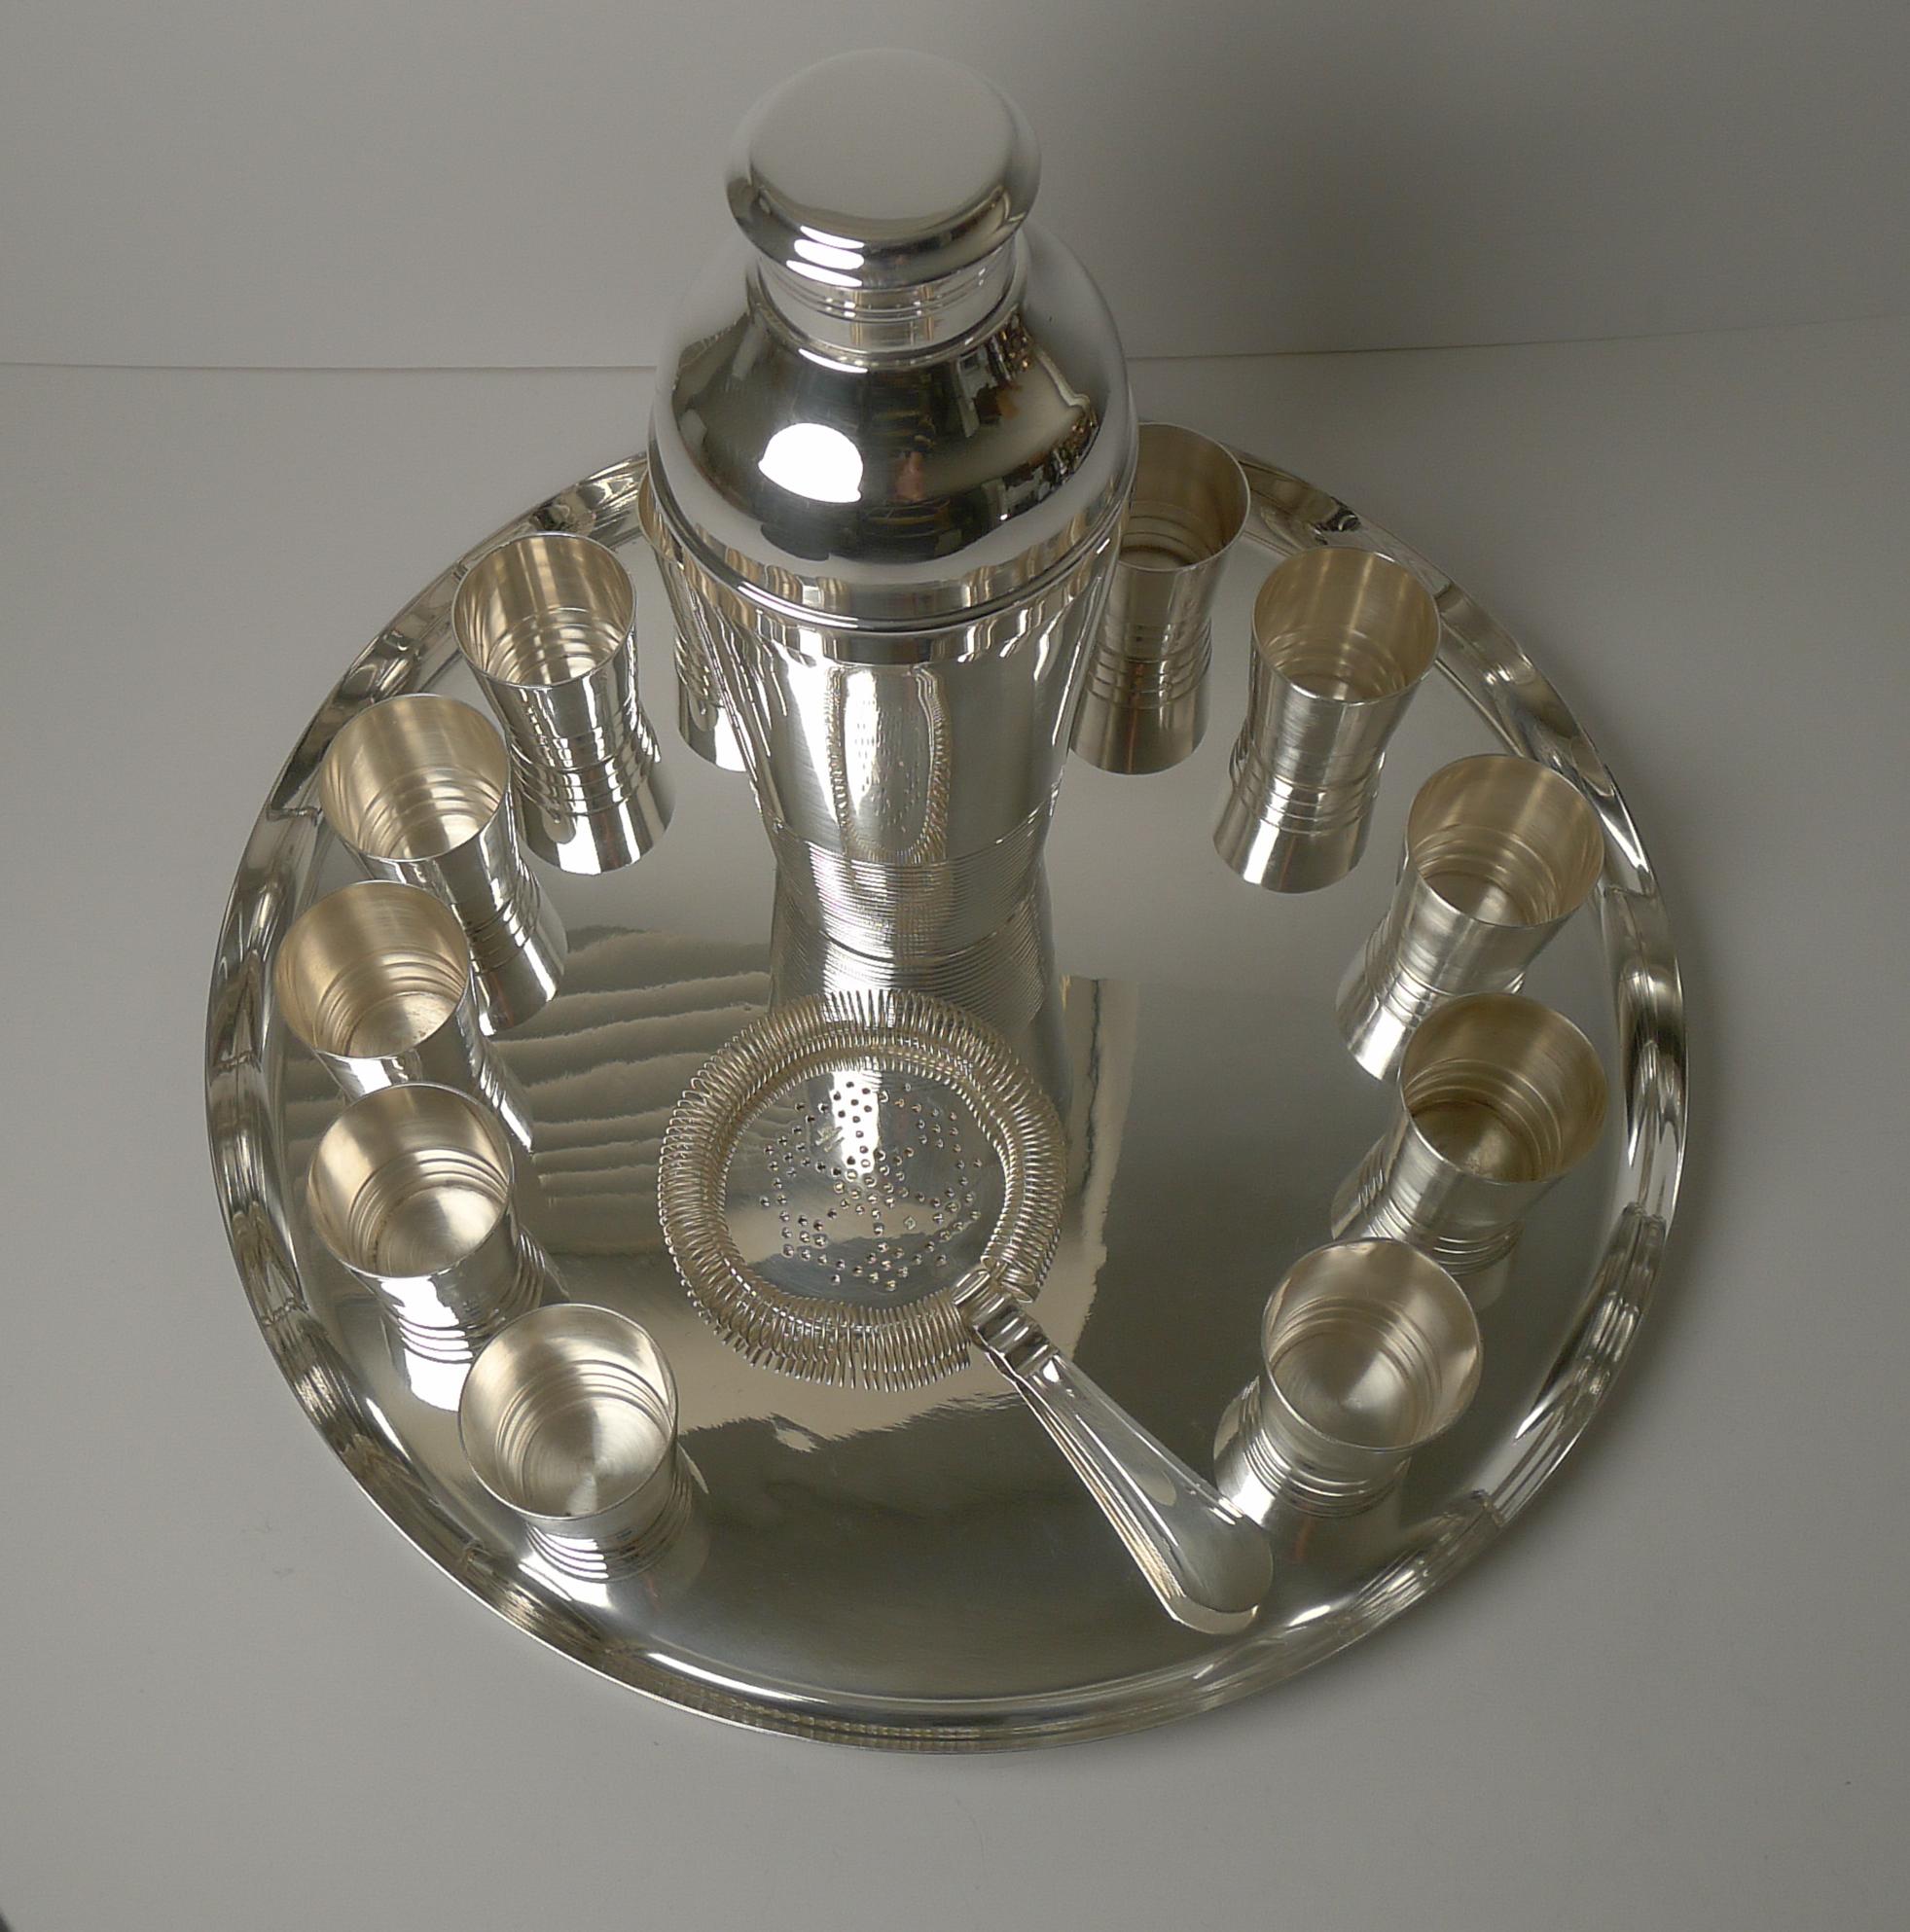 A real find, a wonderful silver plated cocktail set comprising a large circular tray, twelve small shot glasses / cups, a strainer and large cocktail shaker.

The design of the shaker and cups is 